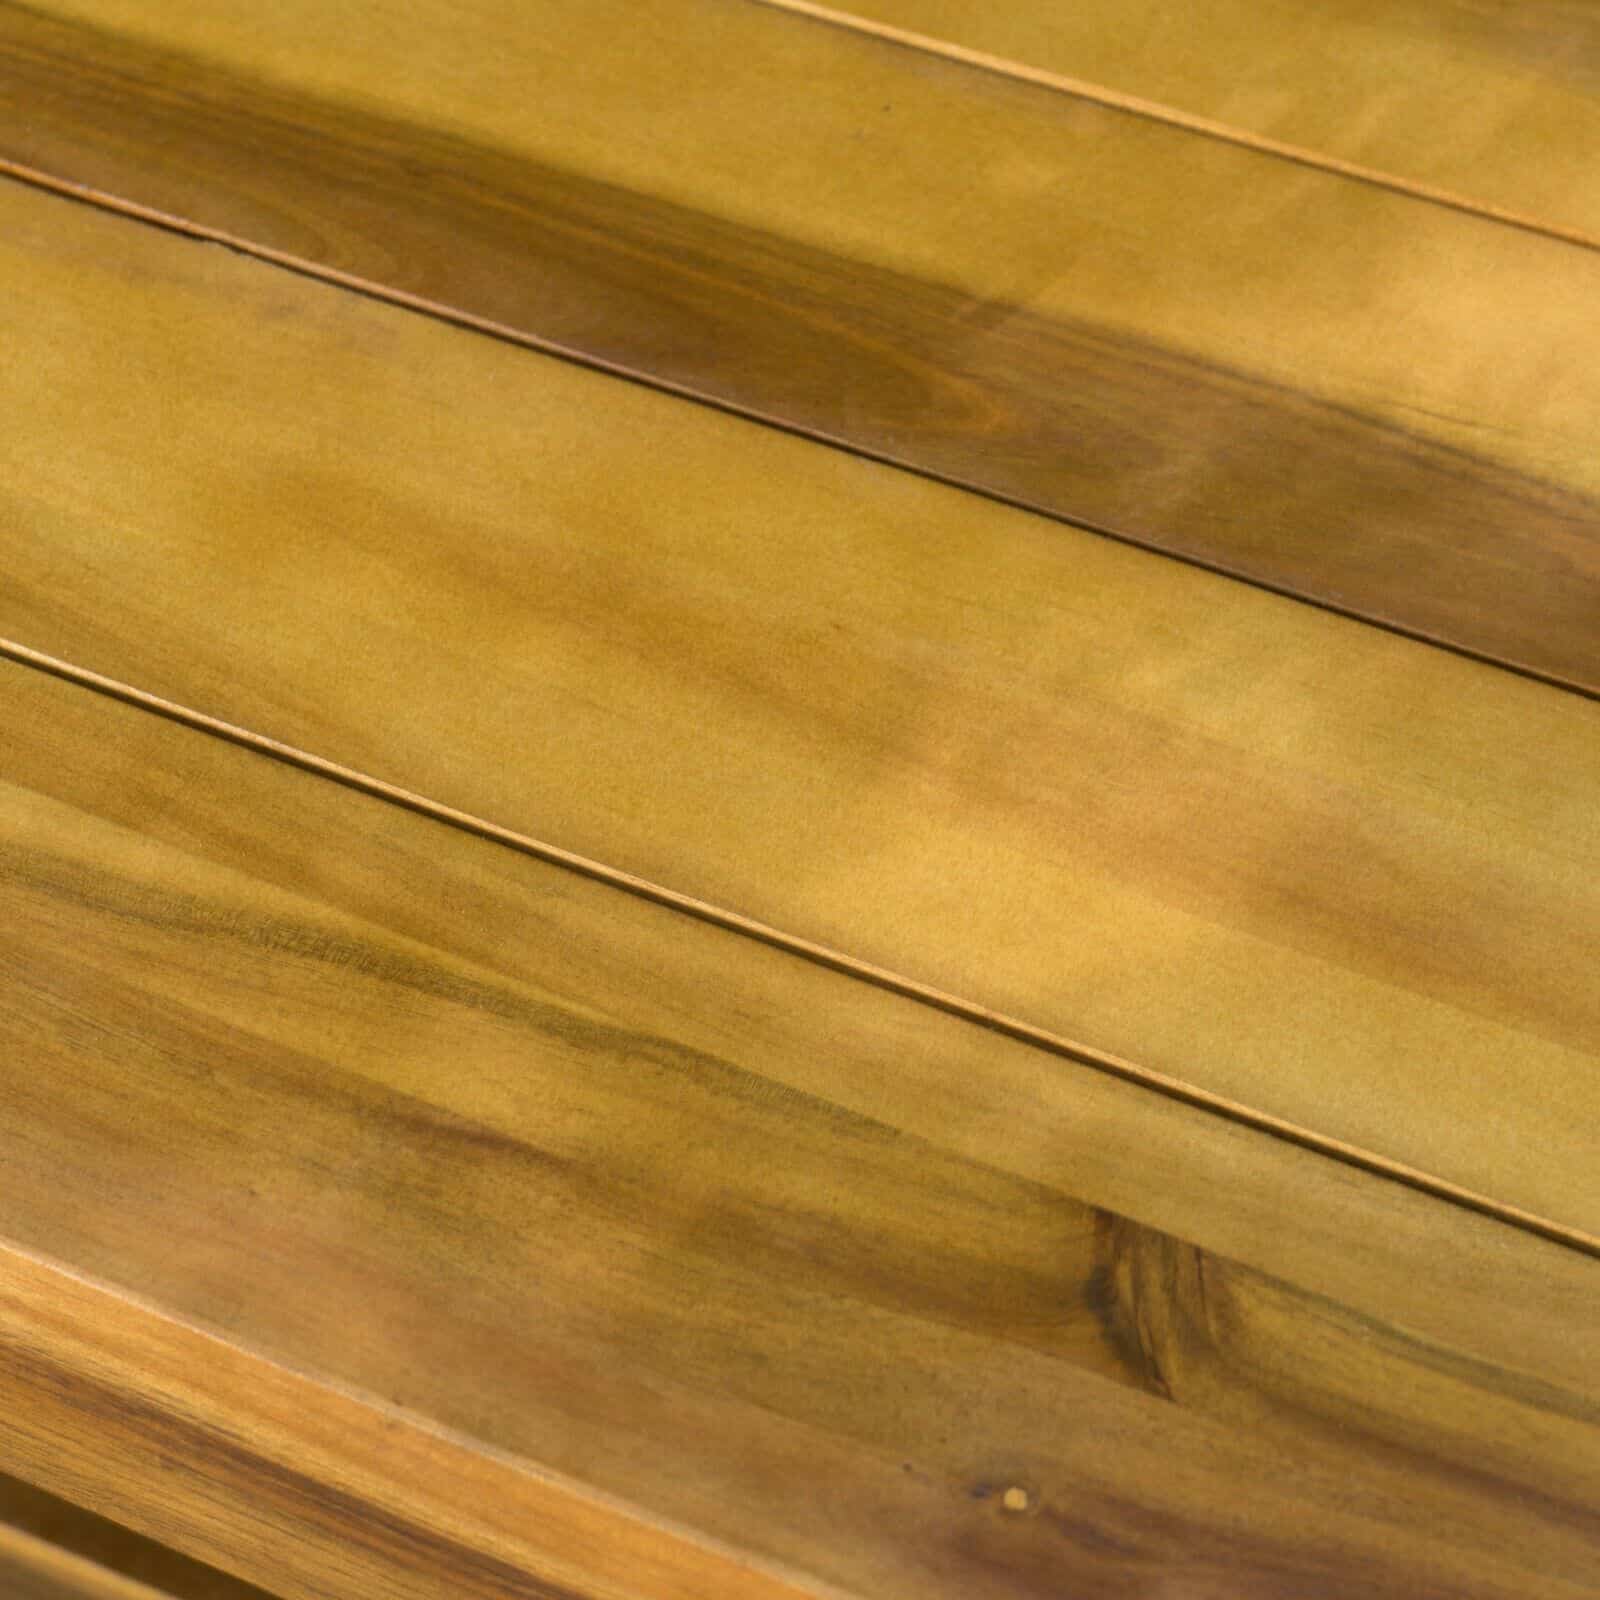 A close up of a wooden table.